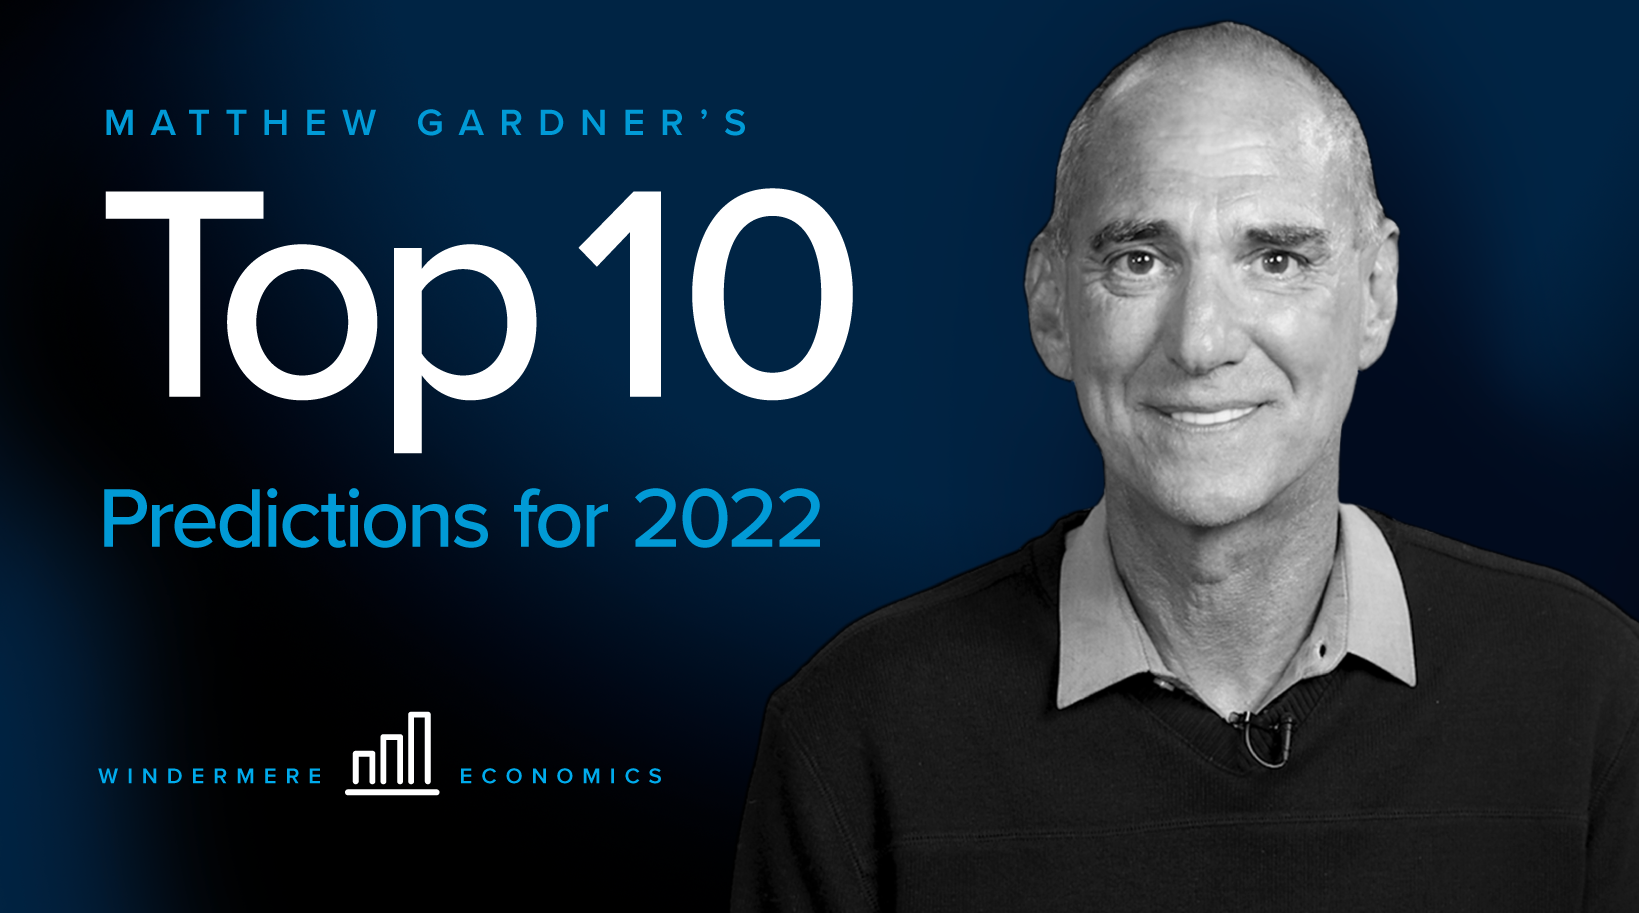 A graphic for Matthew Gardner's "Top 10 Predictions for 2022."